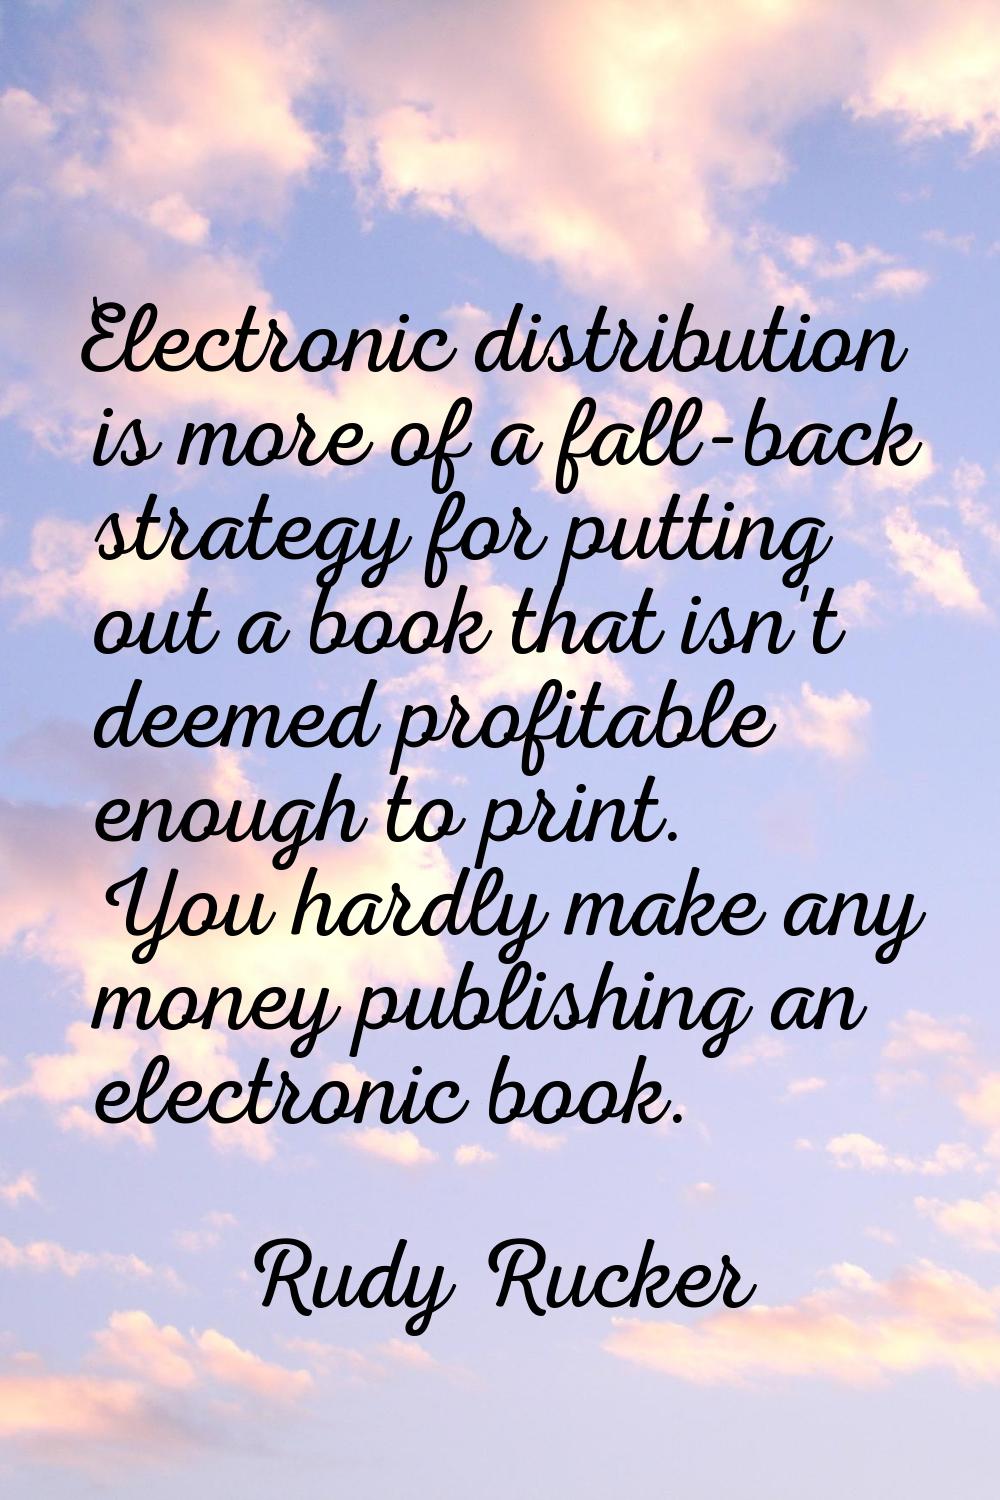 Electronic distribution is more of a fall-back strategy for putting out a book that isn't deemed pr